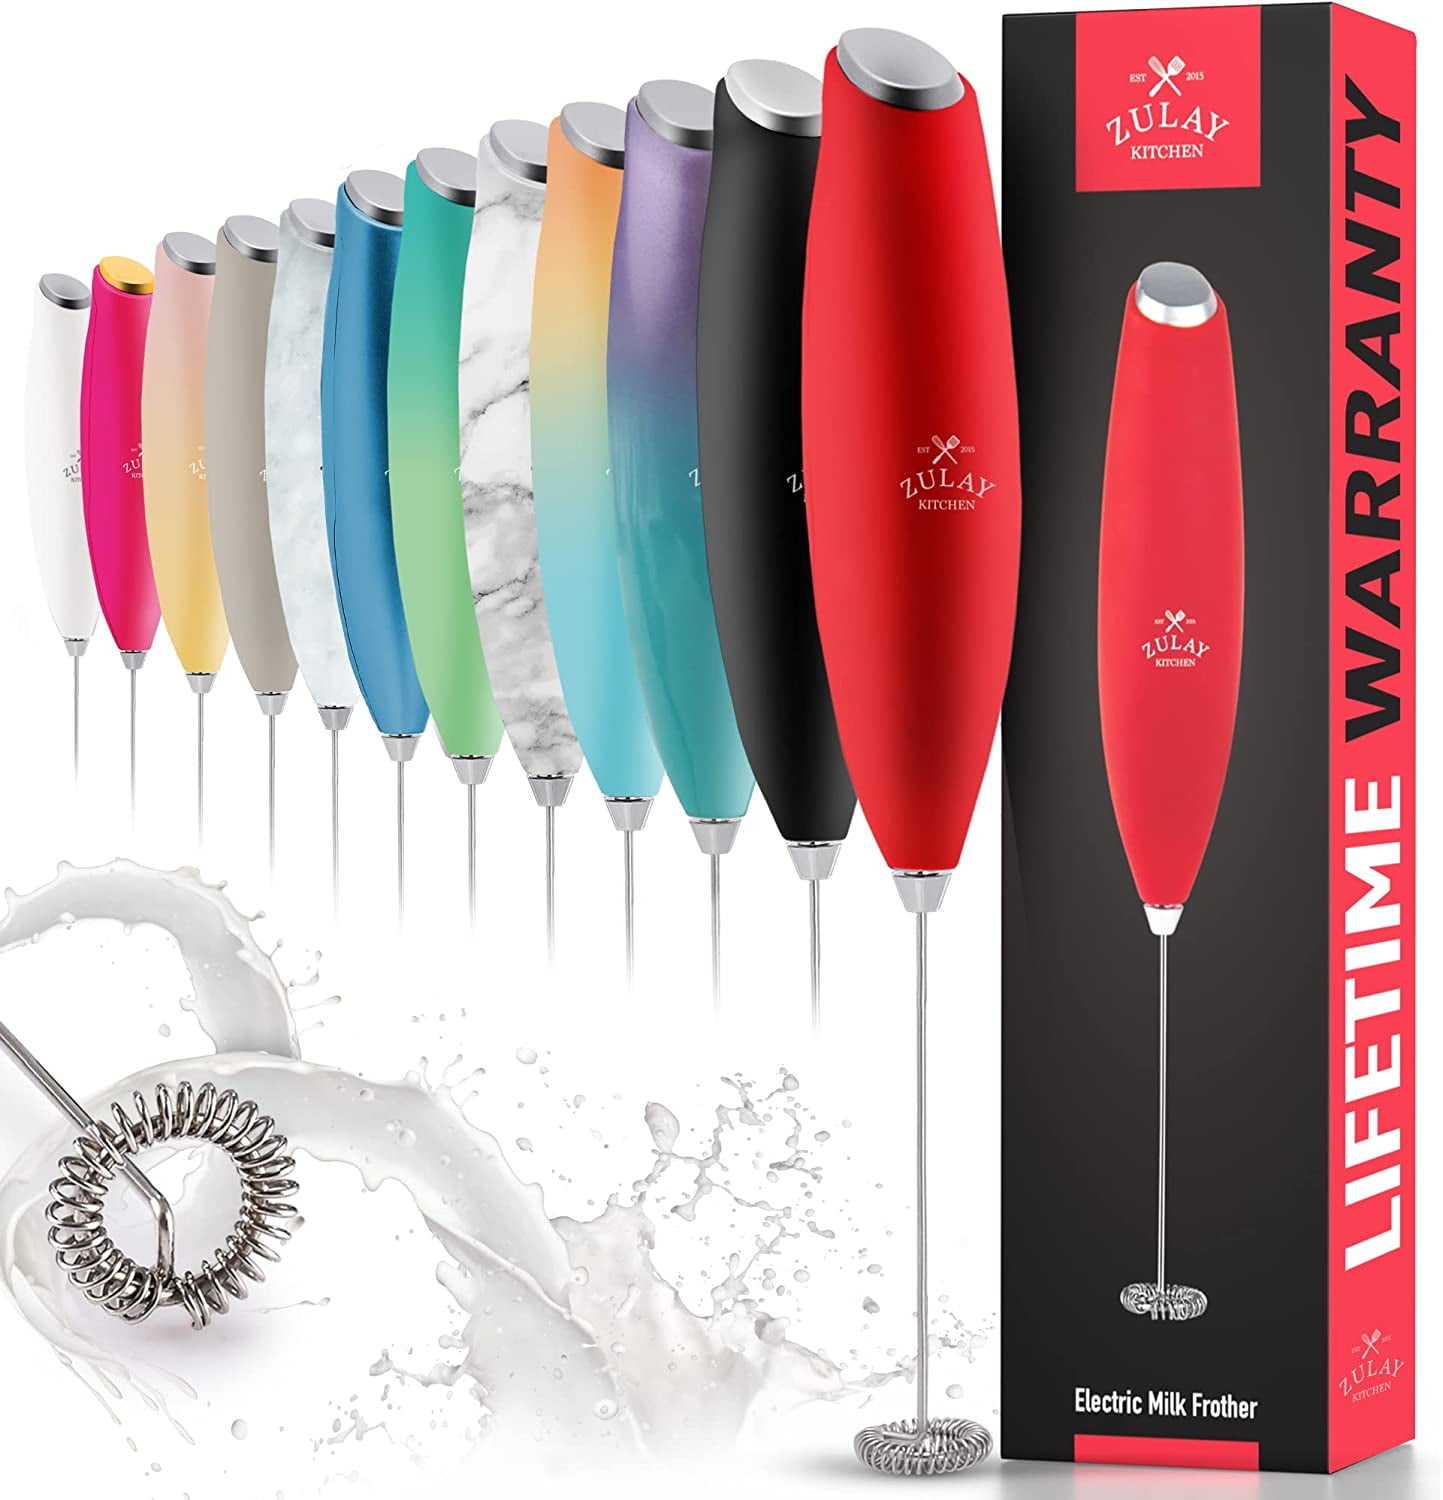 Zulay Powerful Milk Frother Handheld Foam Maker for Lattes - Red